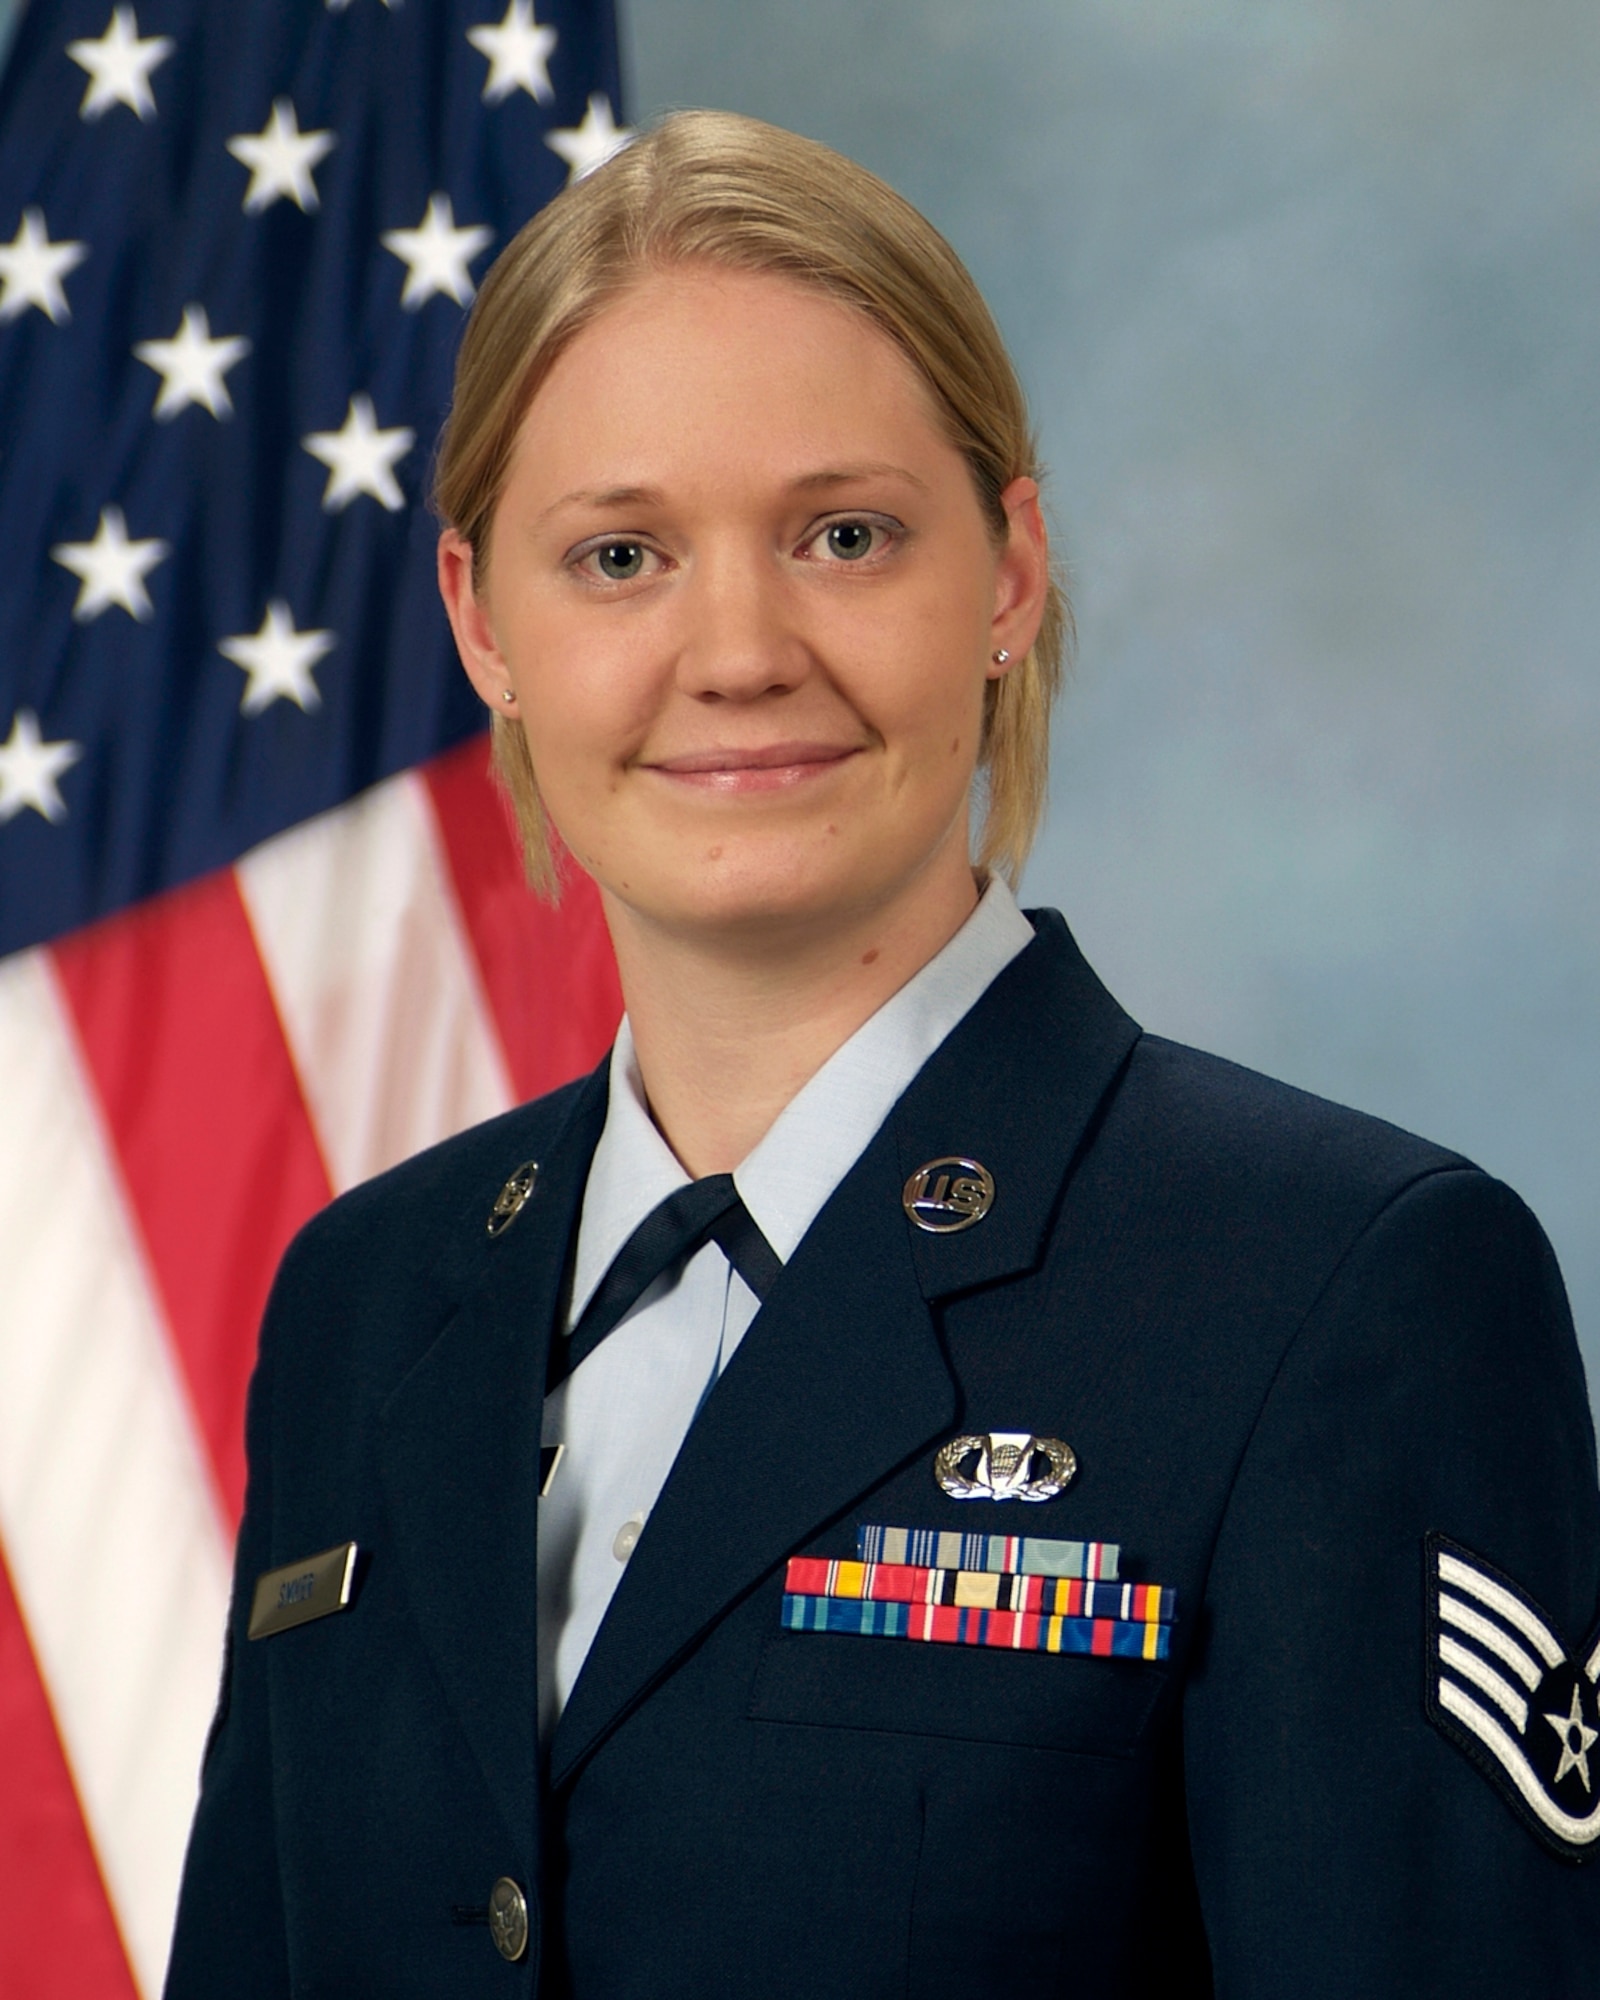 Staff Sgt. Sara Smyer, 21st Space Wing command post, orchestrated the first command post flight follow mission for the Air Force’s second busiest distinguished visitor flightline, supporting more than 83 flights in the first month of implementation. She was instrumental in bolstering regional Emergency Response Operations by integrating the command post, security forces and the fire department into a single command and control center. While deployed in support of Operation Iraqi Freedom, she reduced risk to coalition force convoys by directing 5,000 U.S. Army missions. As a Colorado Springs Parks and Recreation committee member, she helped raise $845,000 for new city parks. Finally, while attending Airman Leadership School, Sergeant Smyer garnered the John L. Levitow Award. (U.S. Air Force photo)
